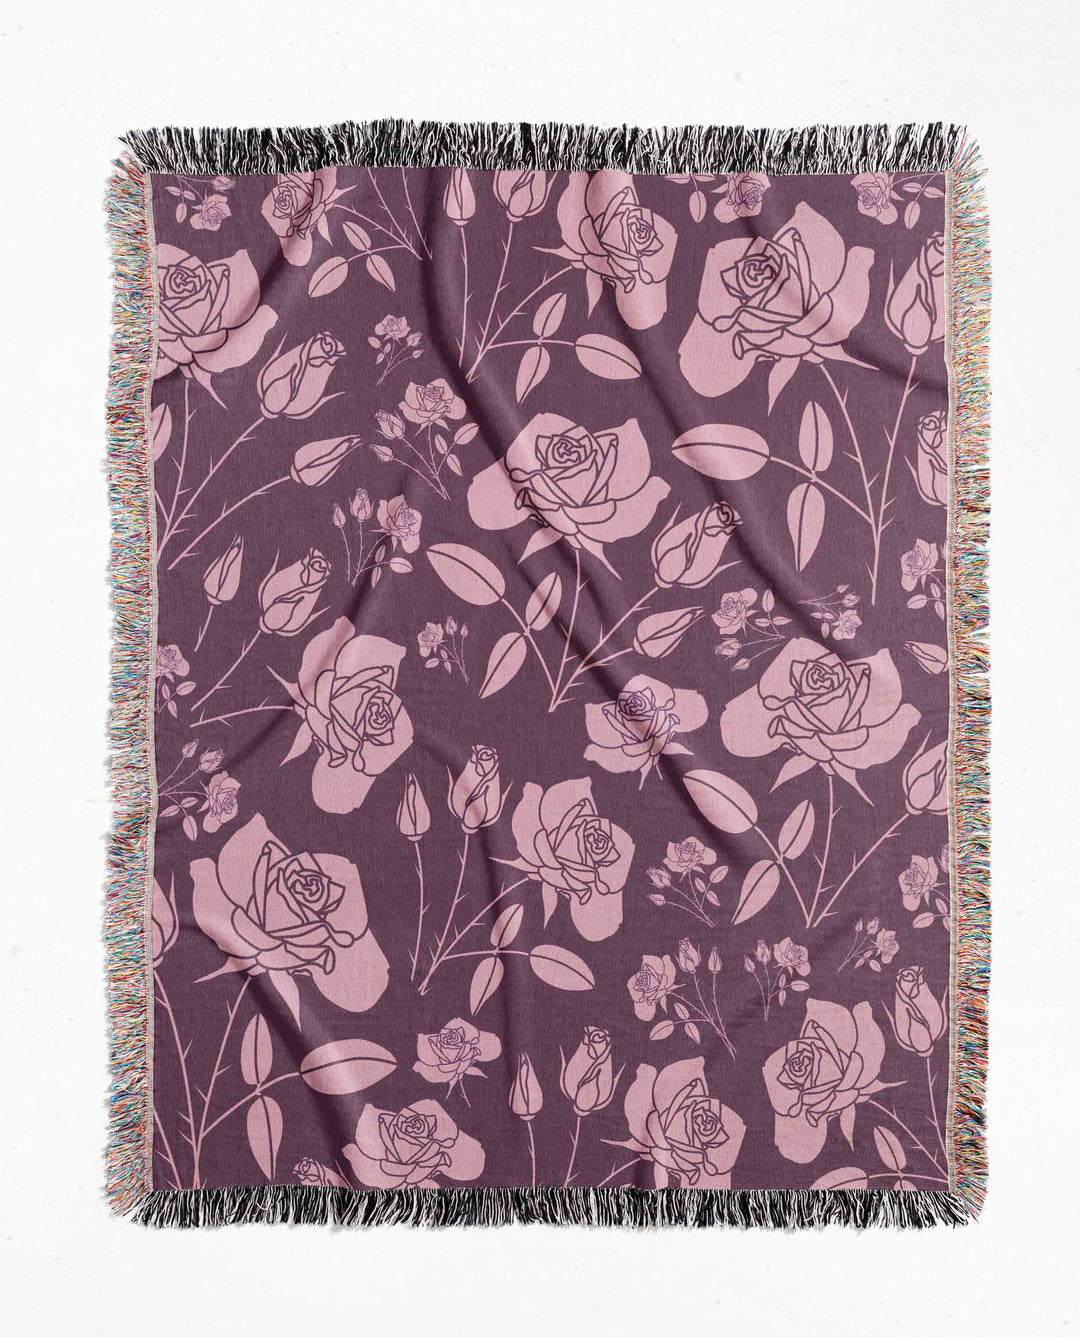 Roses Grande Floral Woven Throw Blanket